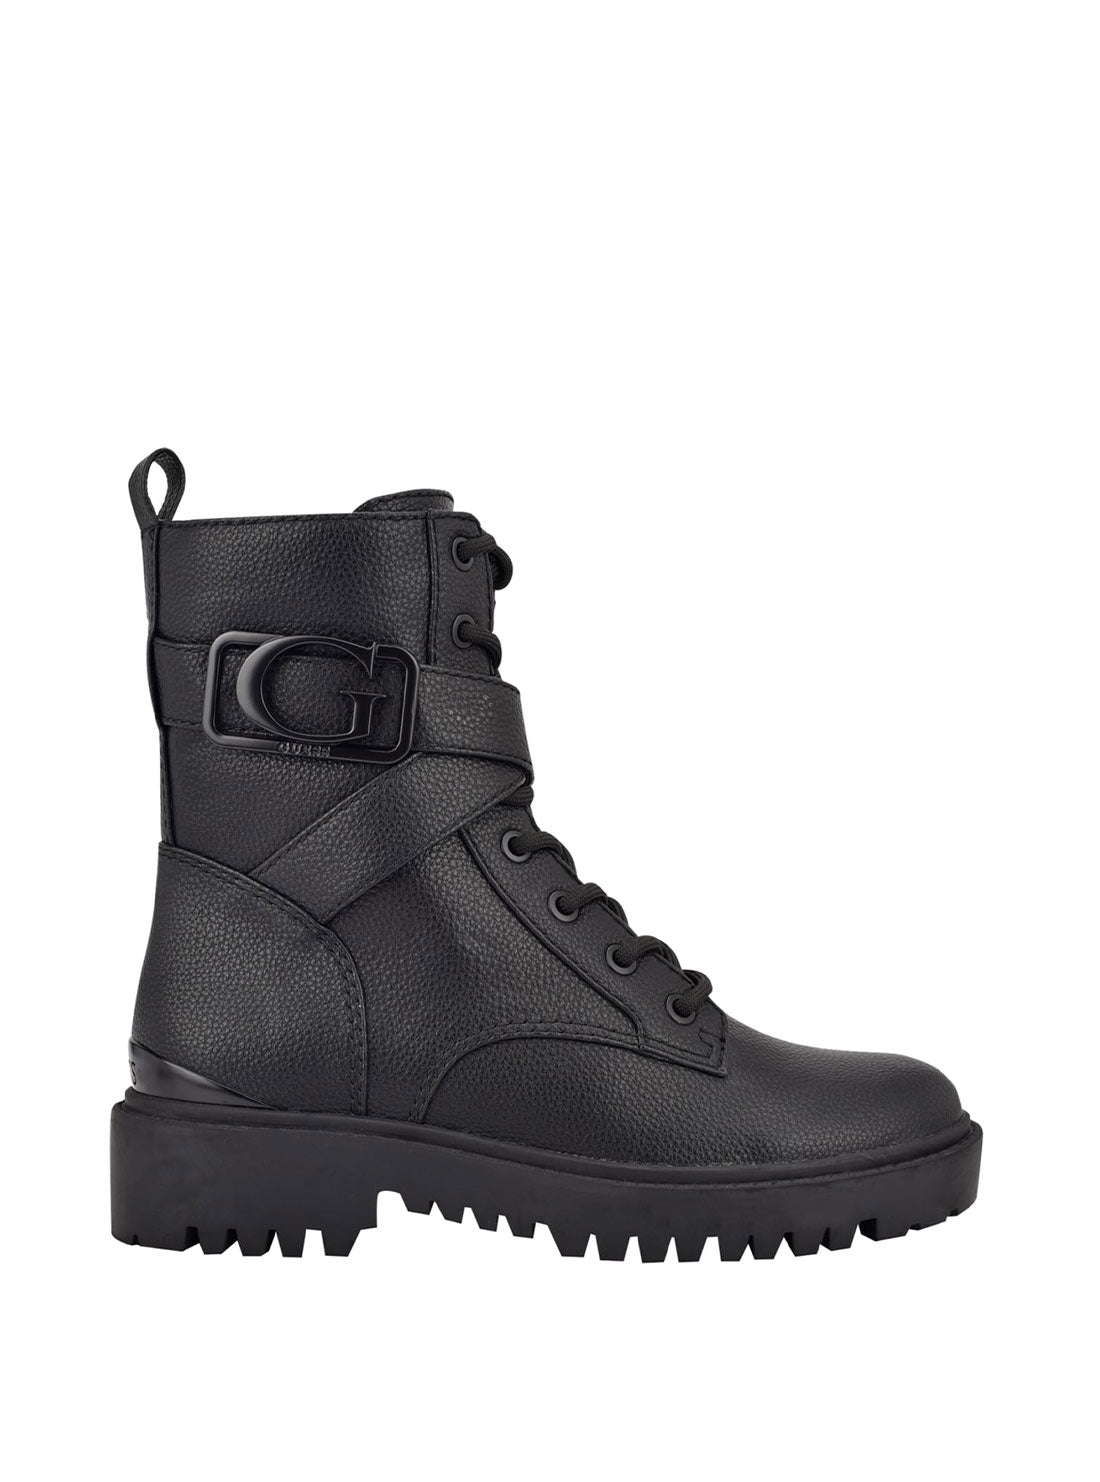 GUESS Black Orana Chunky  Combat Boots side view